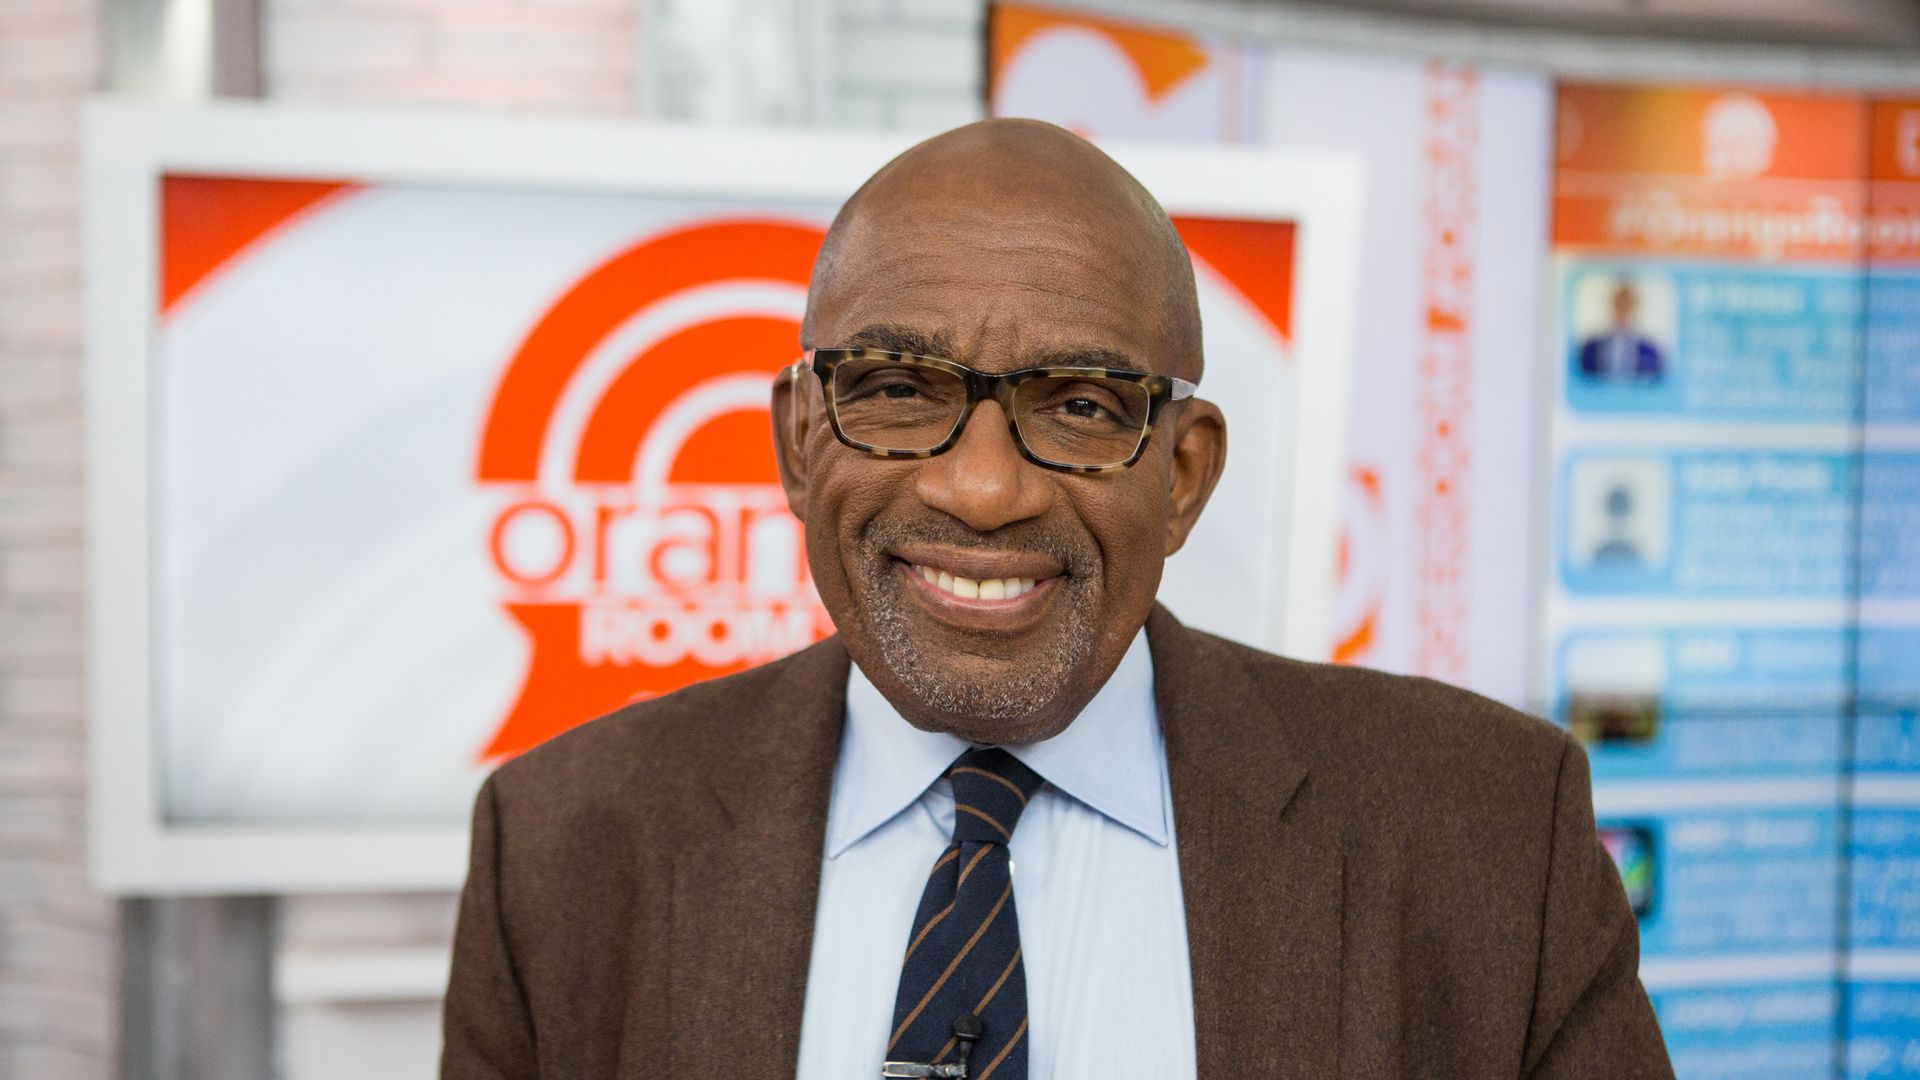 Today's Al Roker reflects on difficult year, looks to the future in